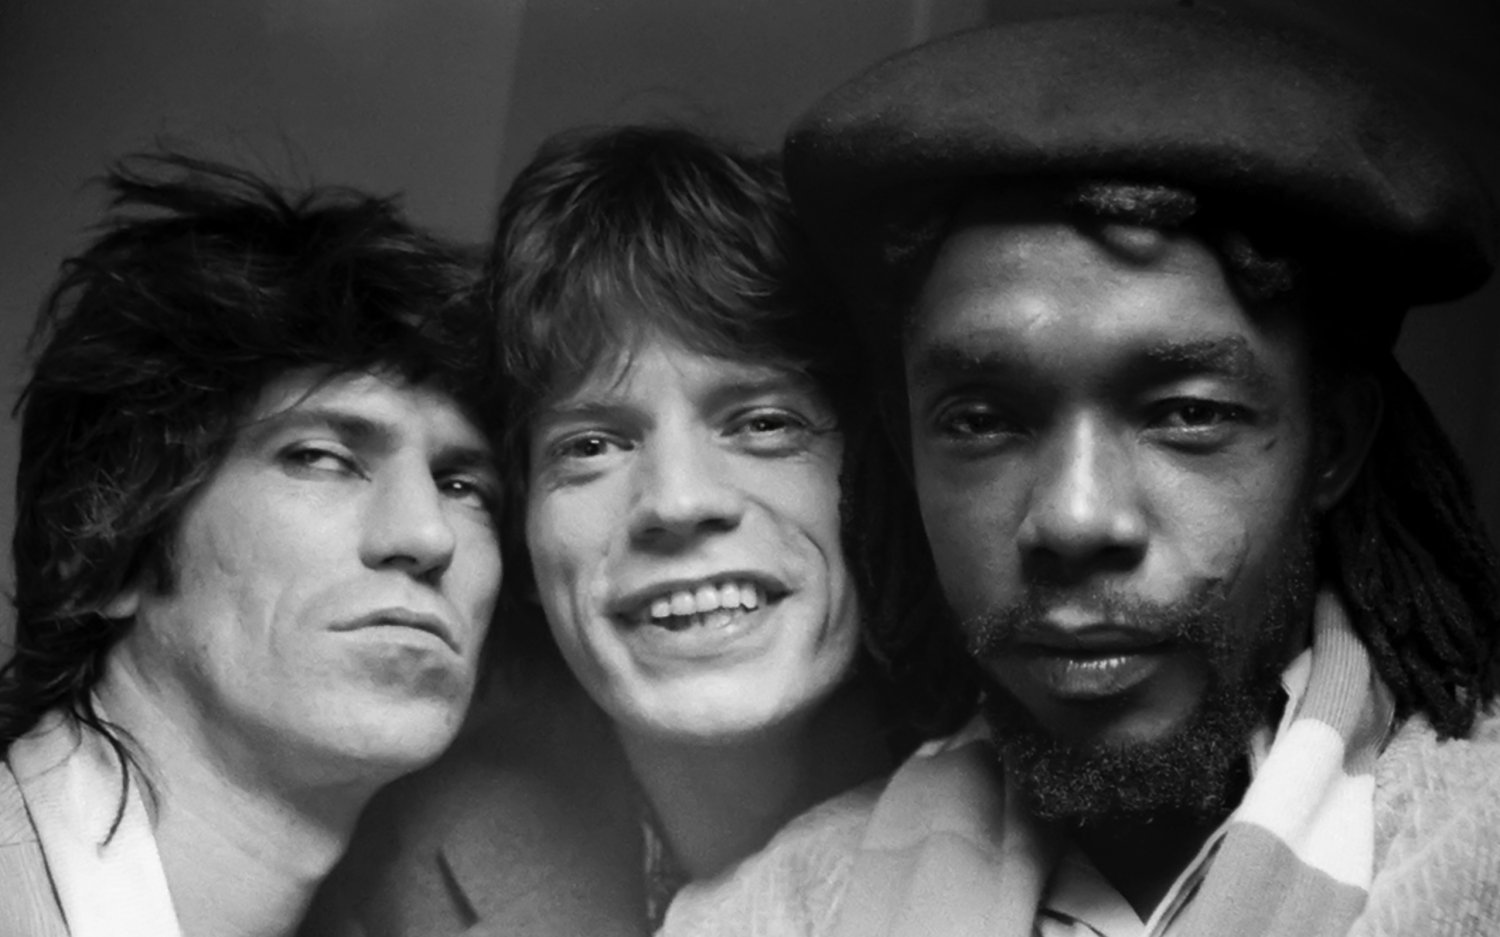 Keith Richards Mick Jagger Peter Tosh 13"x19" (32cm/49cm) Polyester Fabric Poster